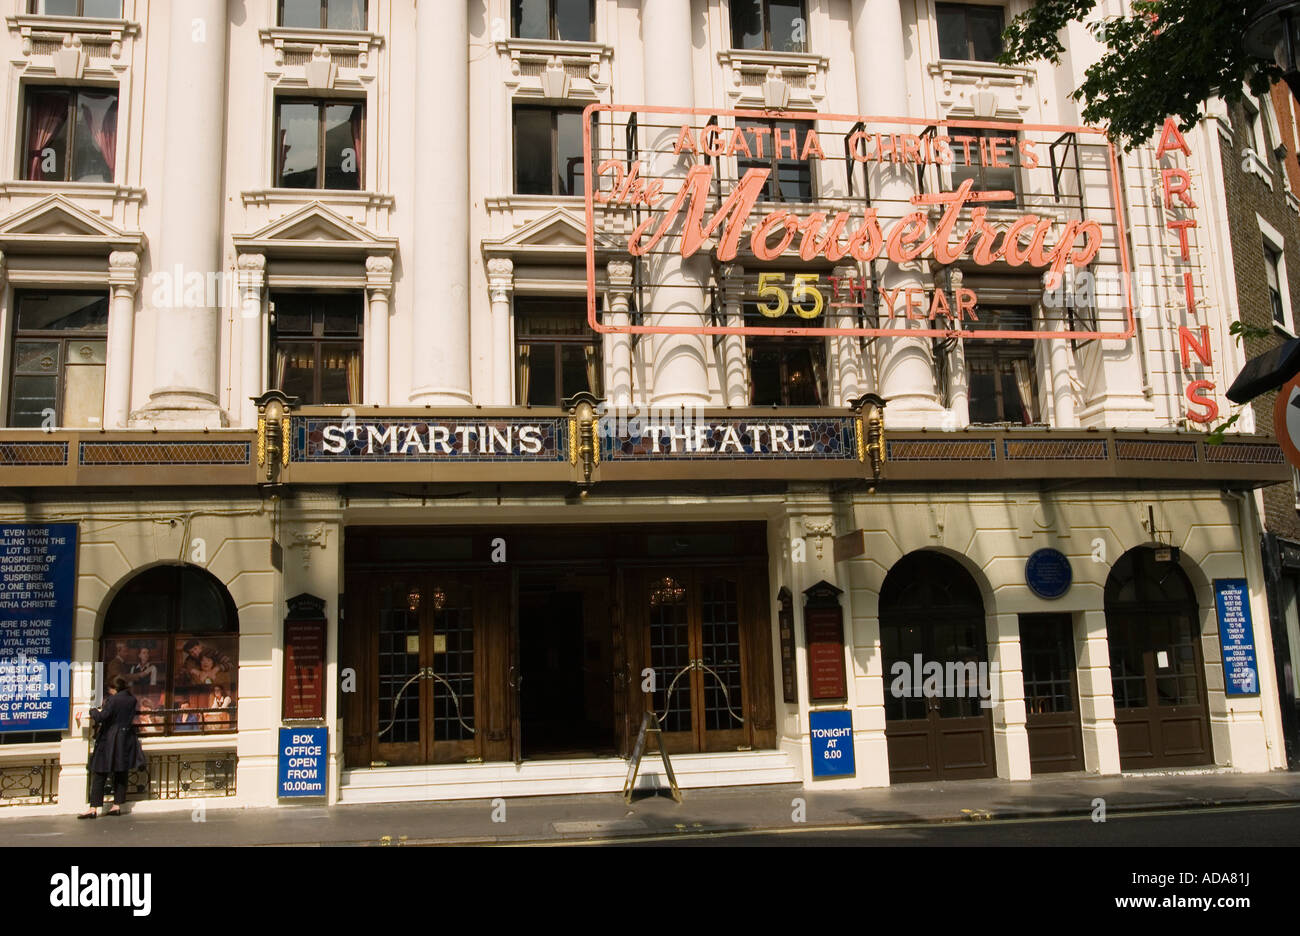 The facade of a theatre, St Martins, West End, London, England Stock Photo